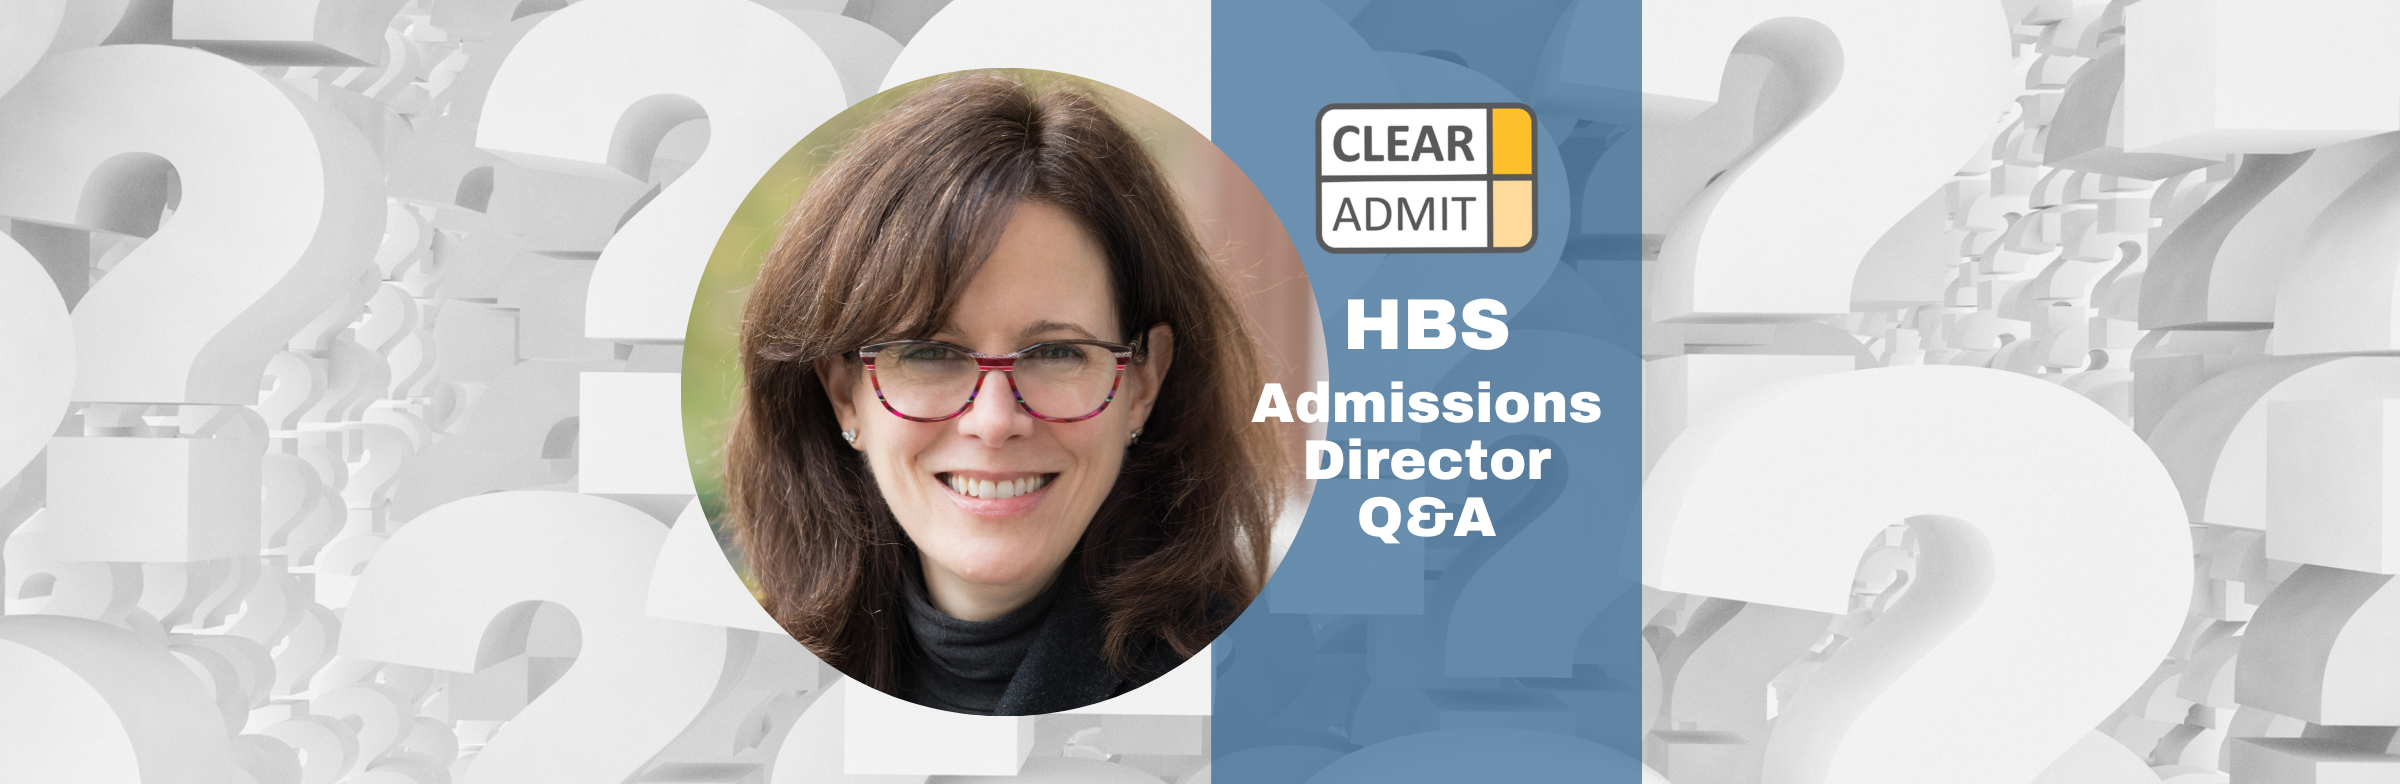 Image for Admissions Director Q&A: Jana Kierstead of Harvard Business School